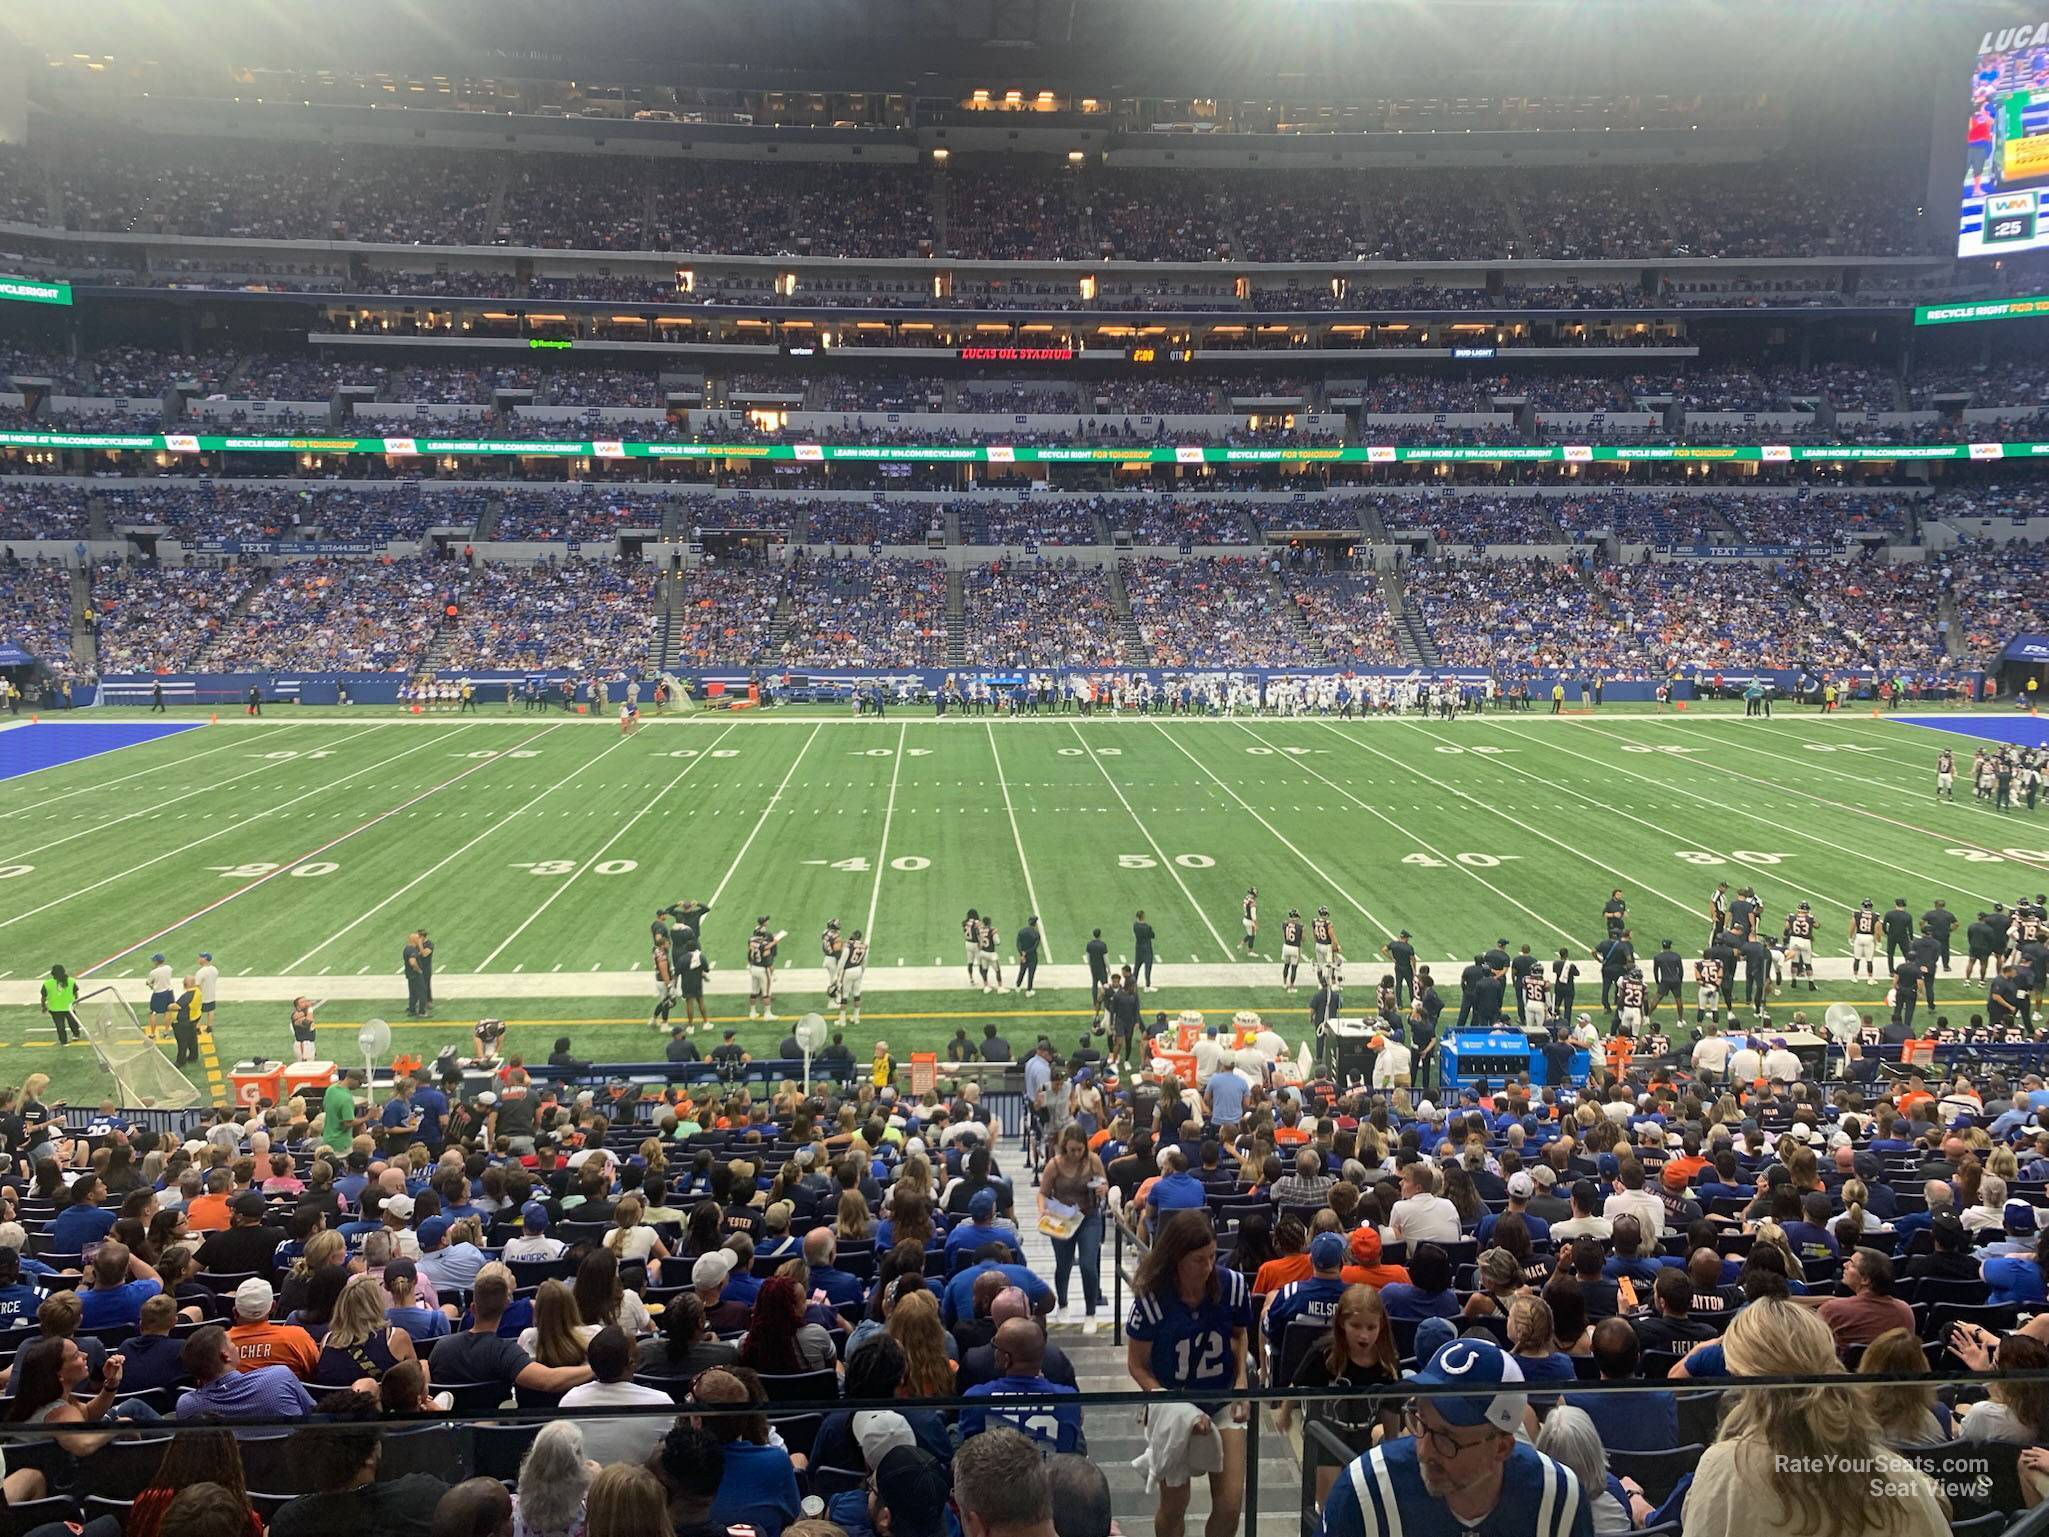 section 213, row 1 seat view  for football - lucas oil stadium